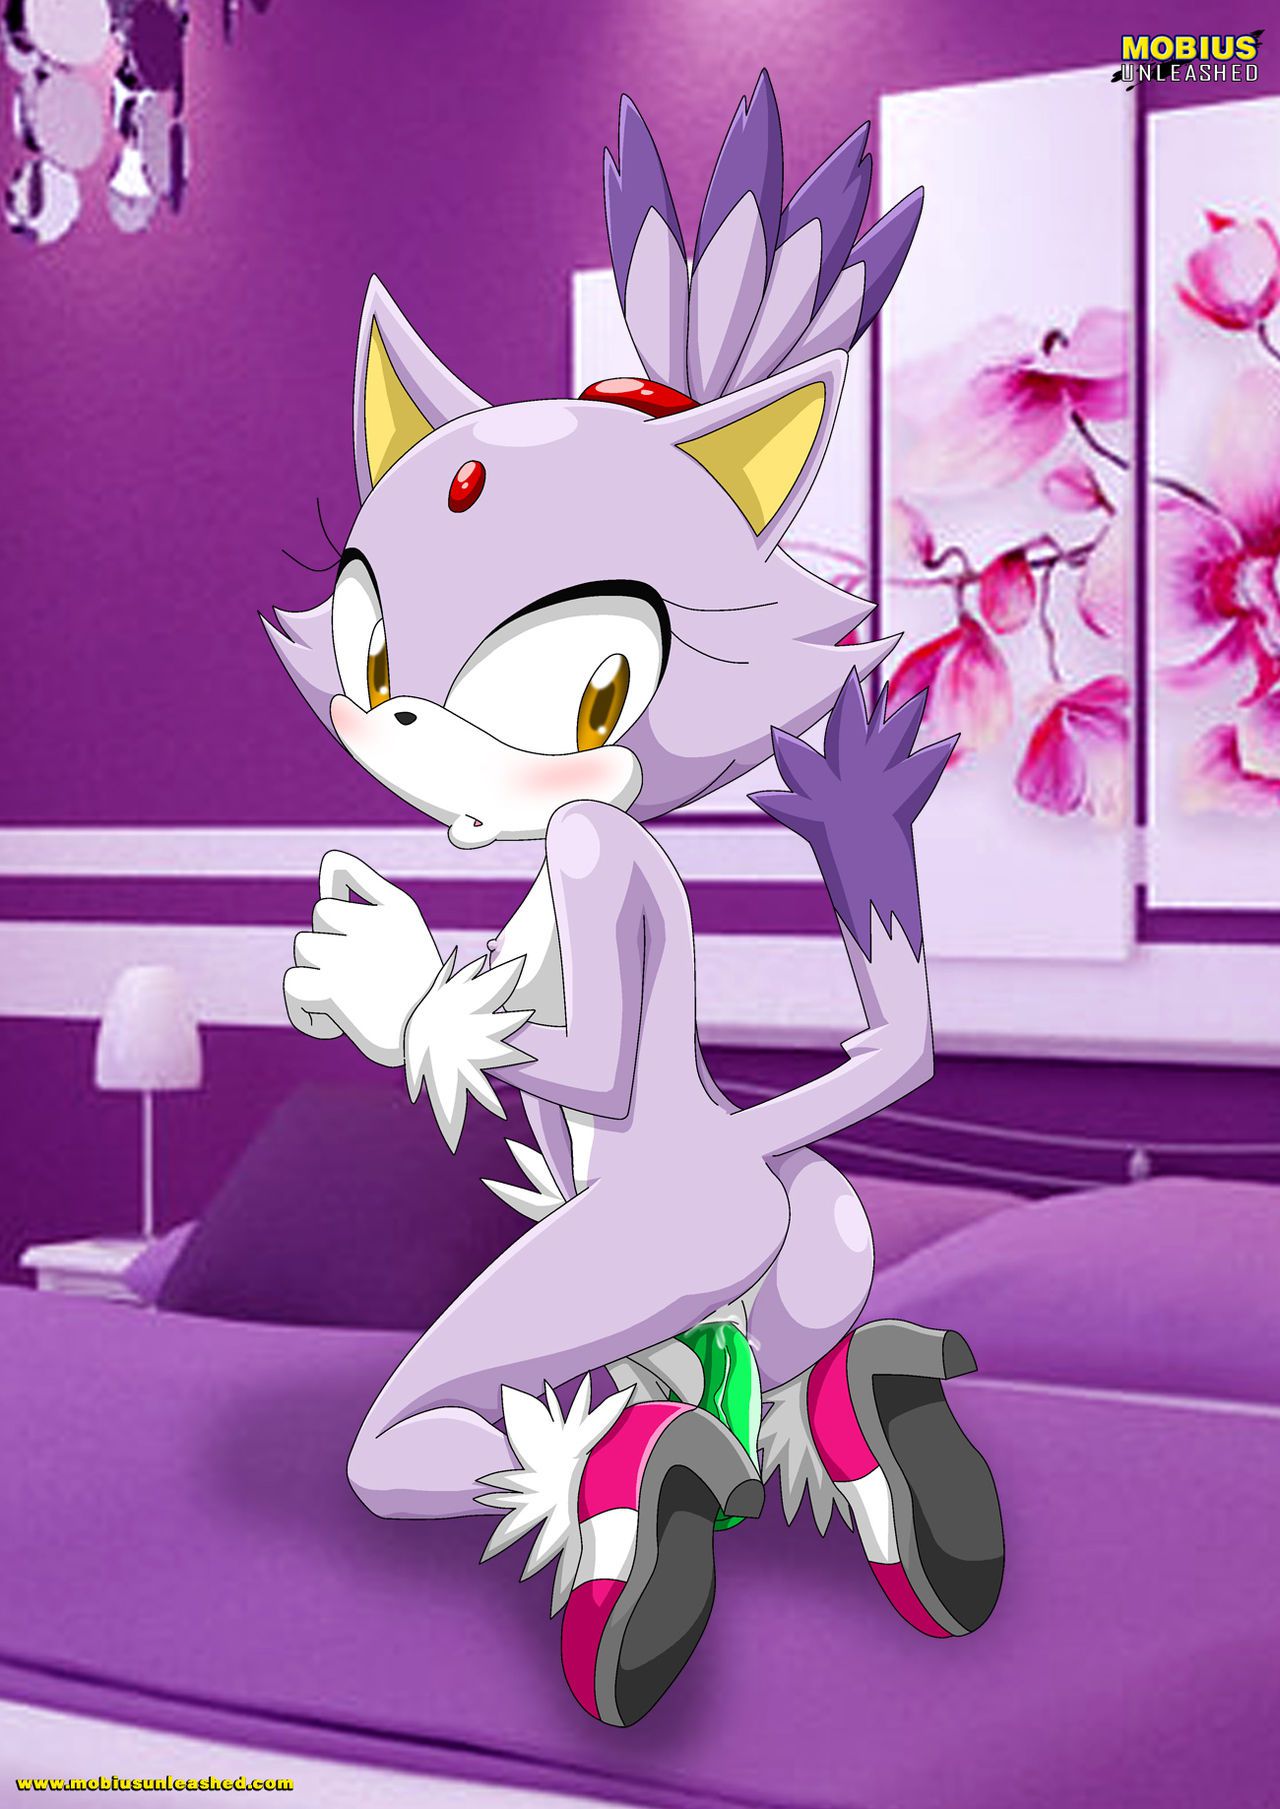 Mobius Unleashed: Blaze the Cat 31